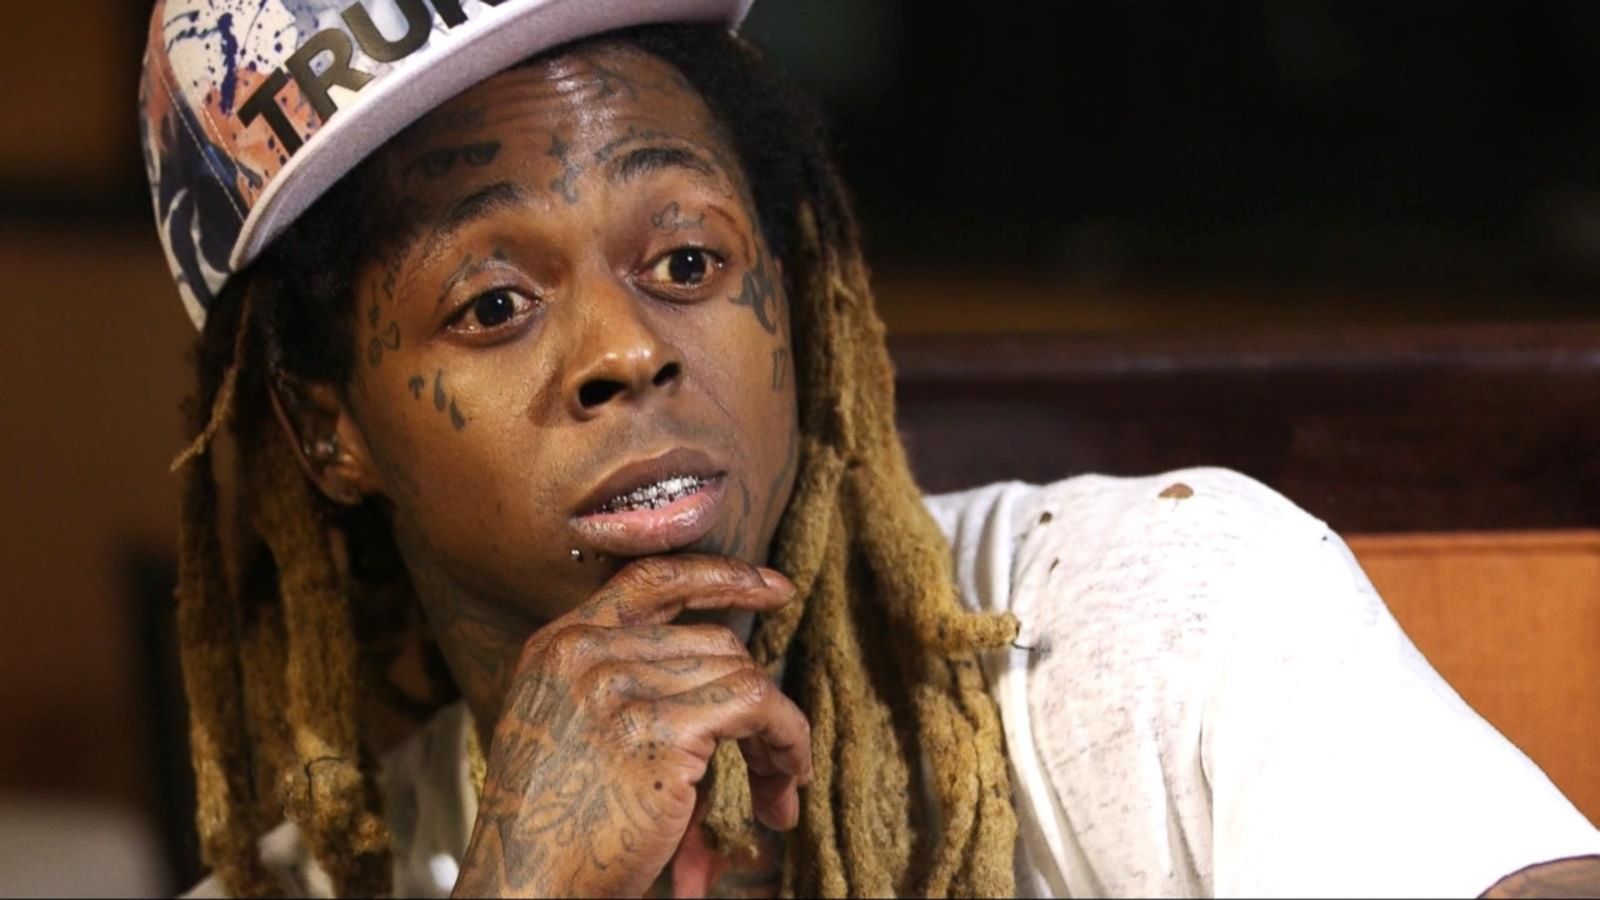 Rapper Lil Wayne Says He Doesn't Feel Connected to the Black Lives Matter Movement